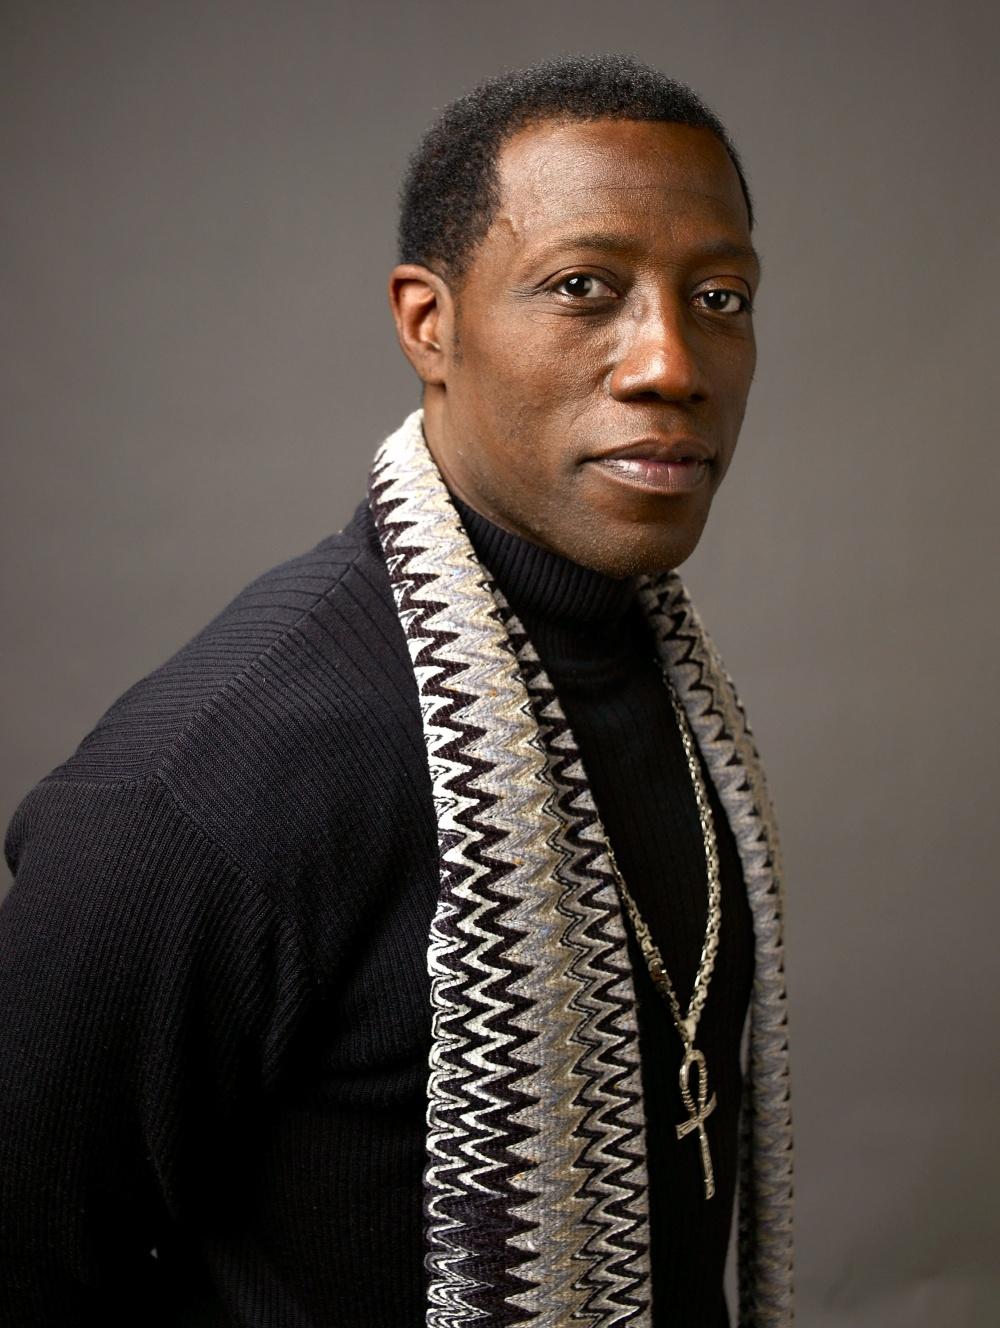 Photo №6793 Wesley Snipes.